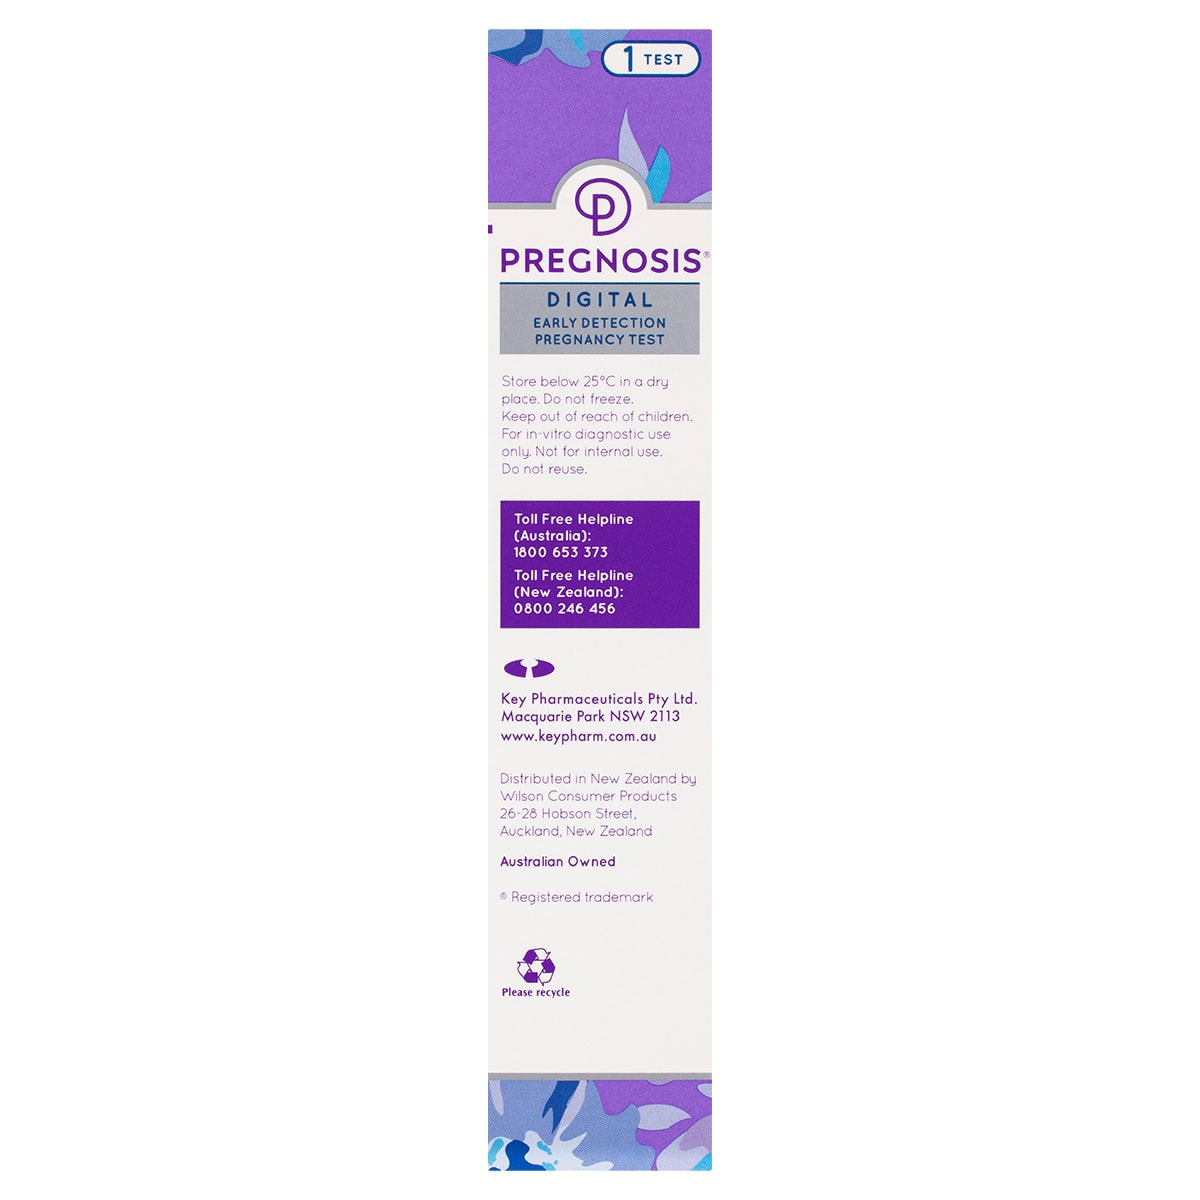 Pregnosis Digital Early Detection Pregnancy Test 1 Test